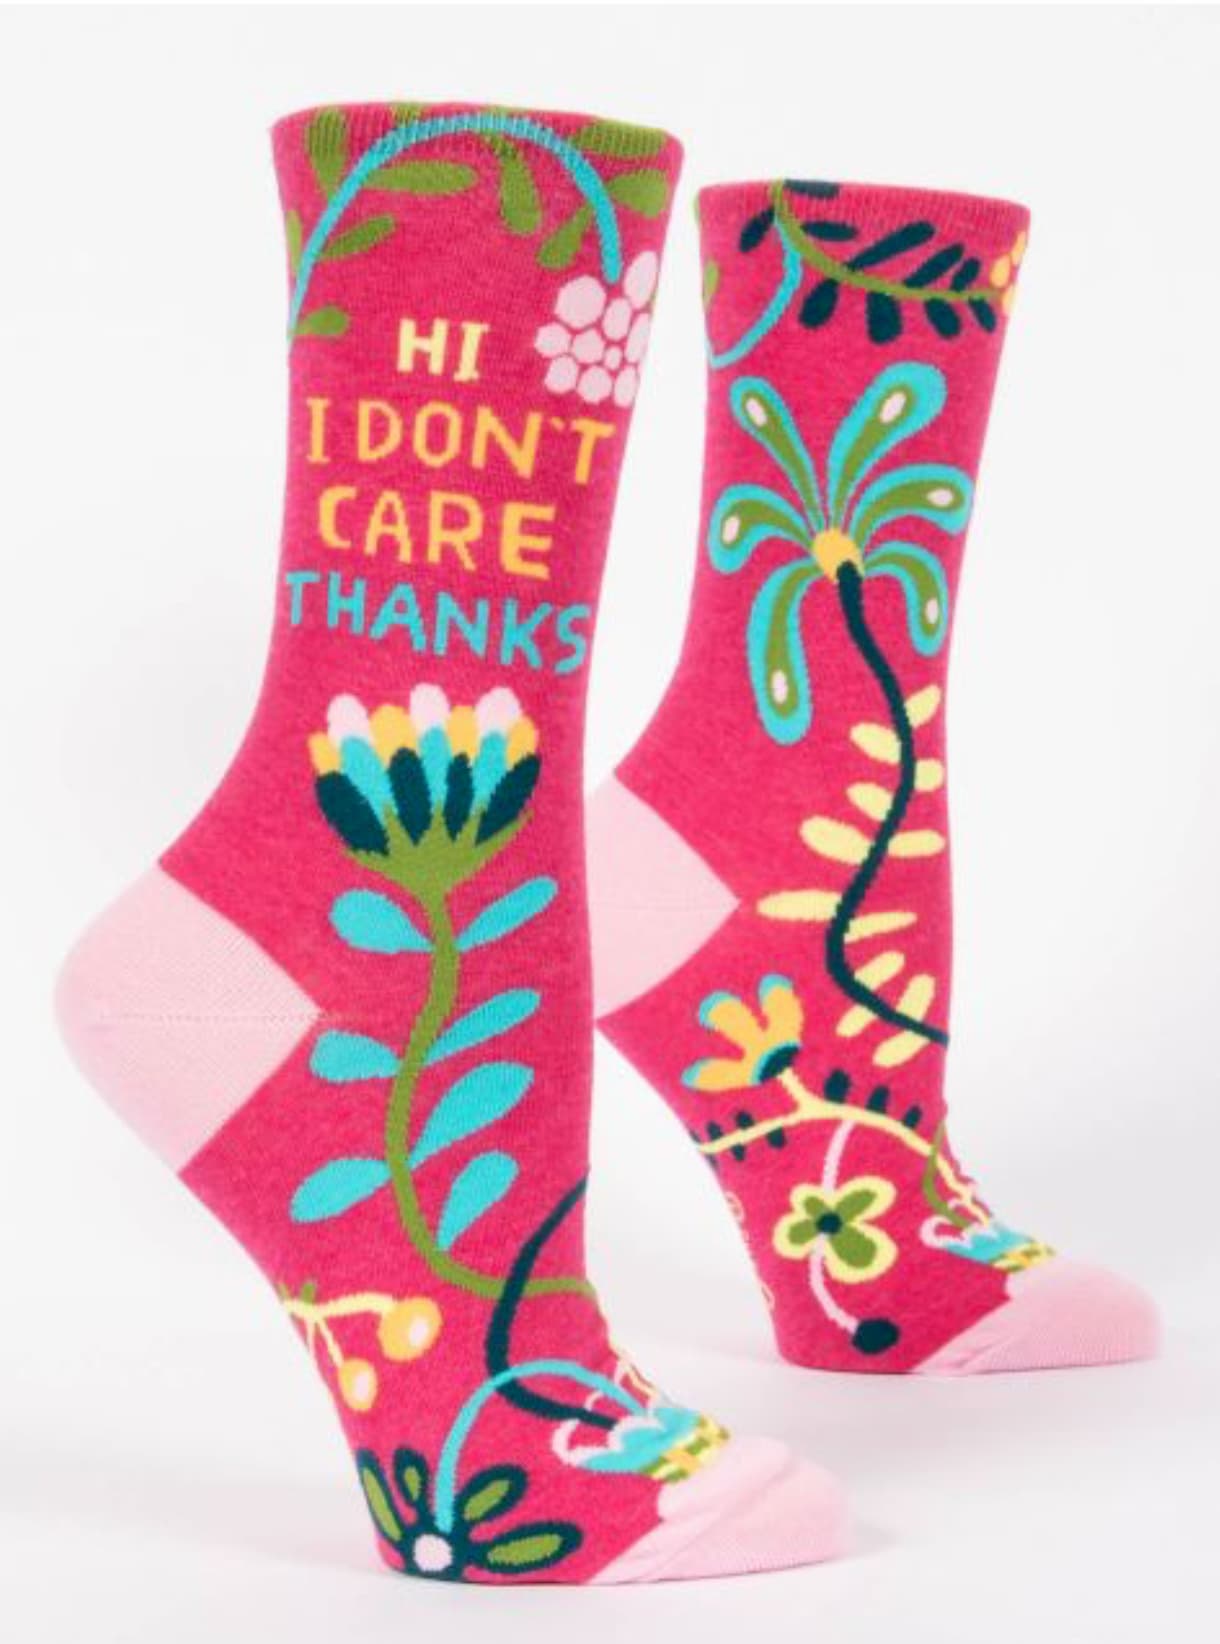 Pink sock with flowers in green and turquoise with the words "Hi I don't care thanks"